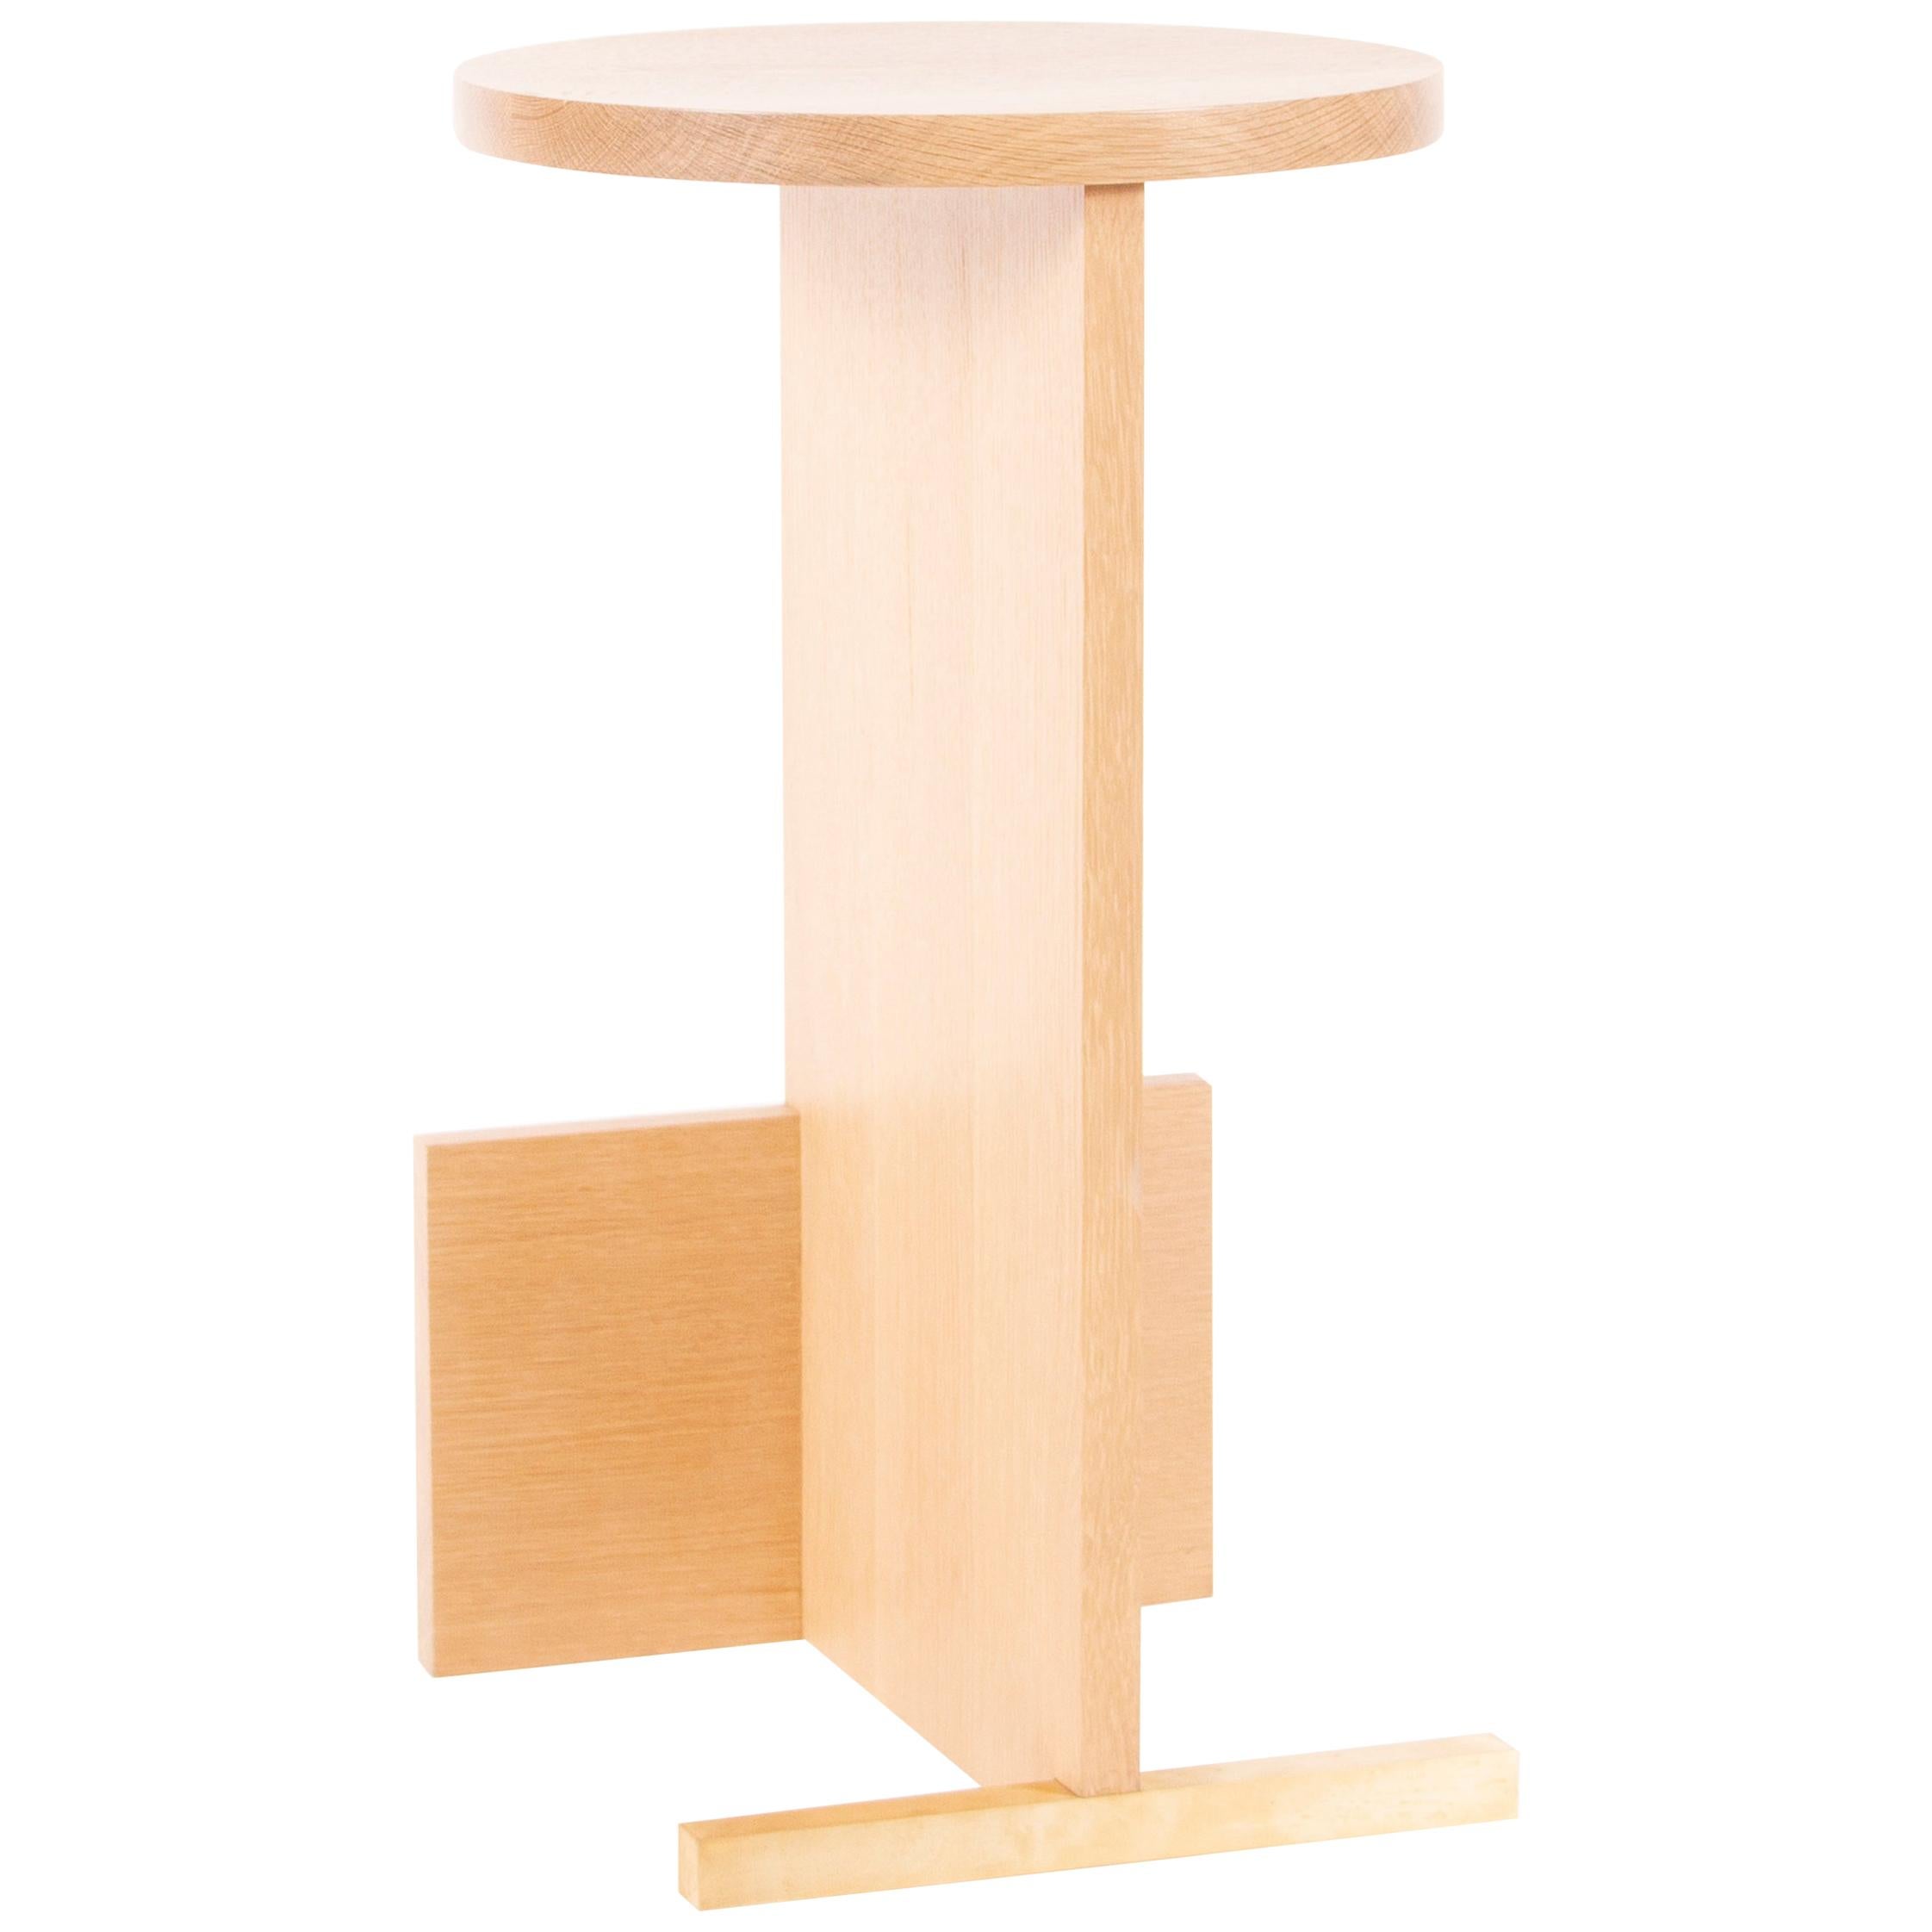 A minimal, timeless counter stool in solid white oak with a brass base detail. This stool can be made for counter or bar height.

Materials: White oak, brass

Also available in: Walnut, ash, maple, black-stained ash, red oak.


Designed and